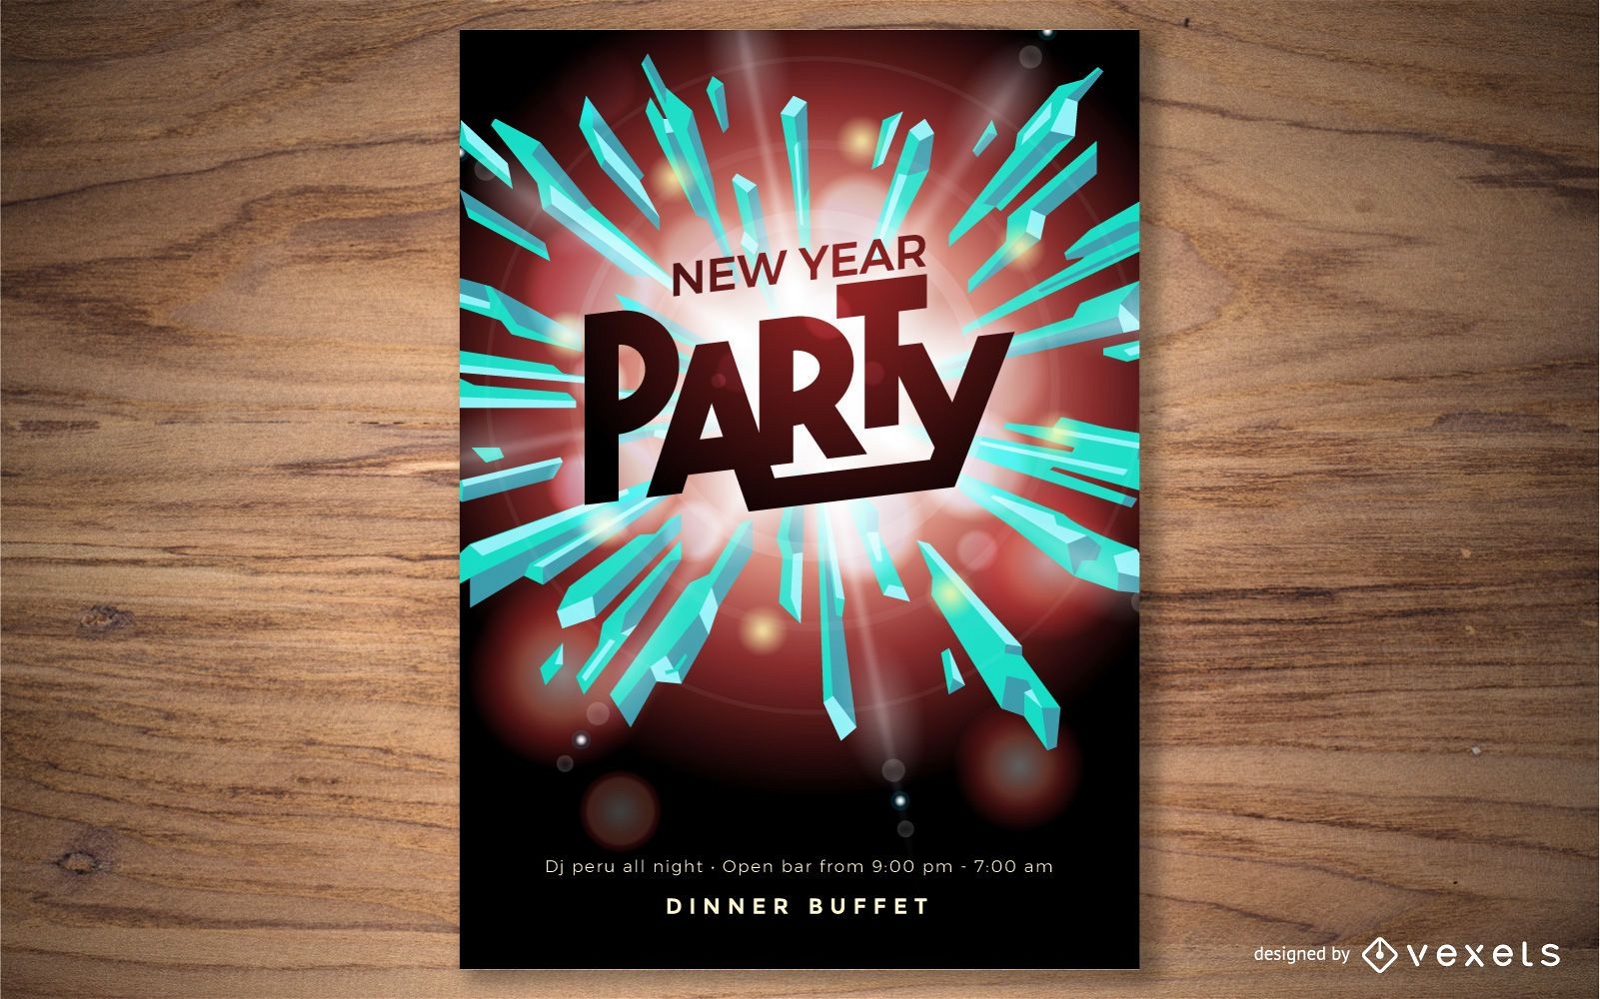 Party New Year Poster Design